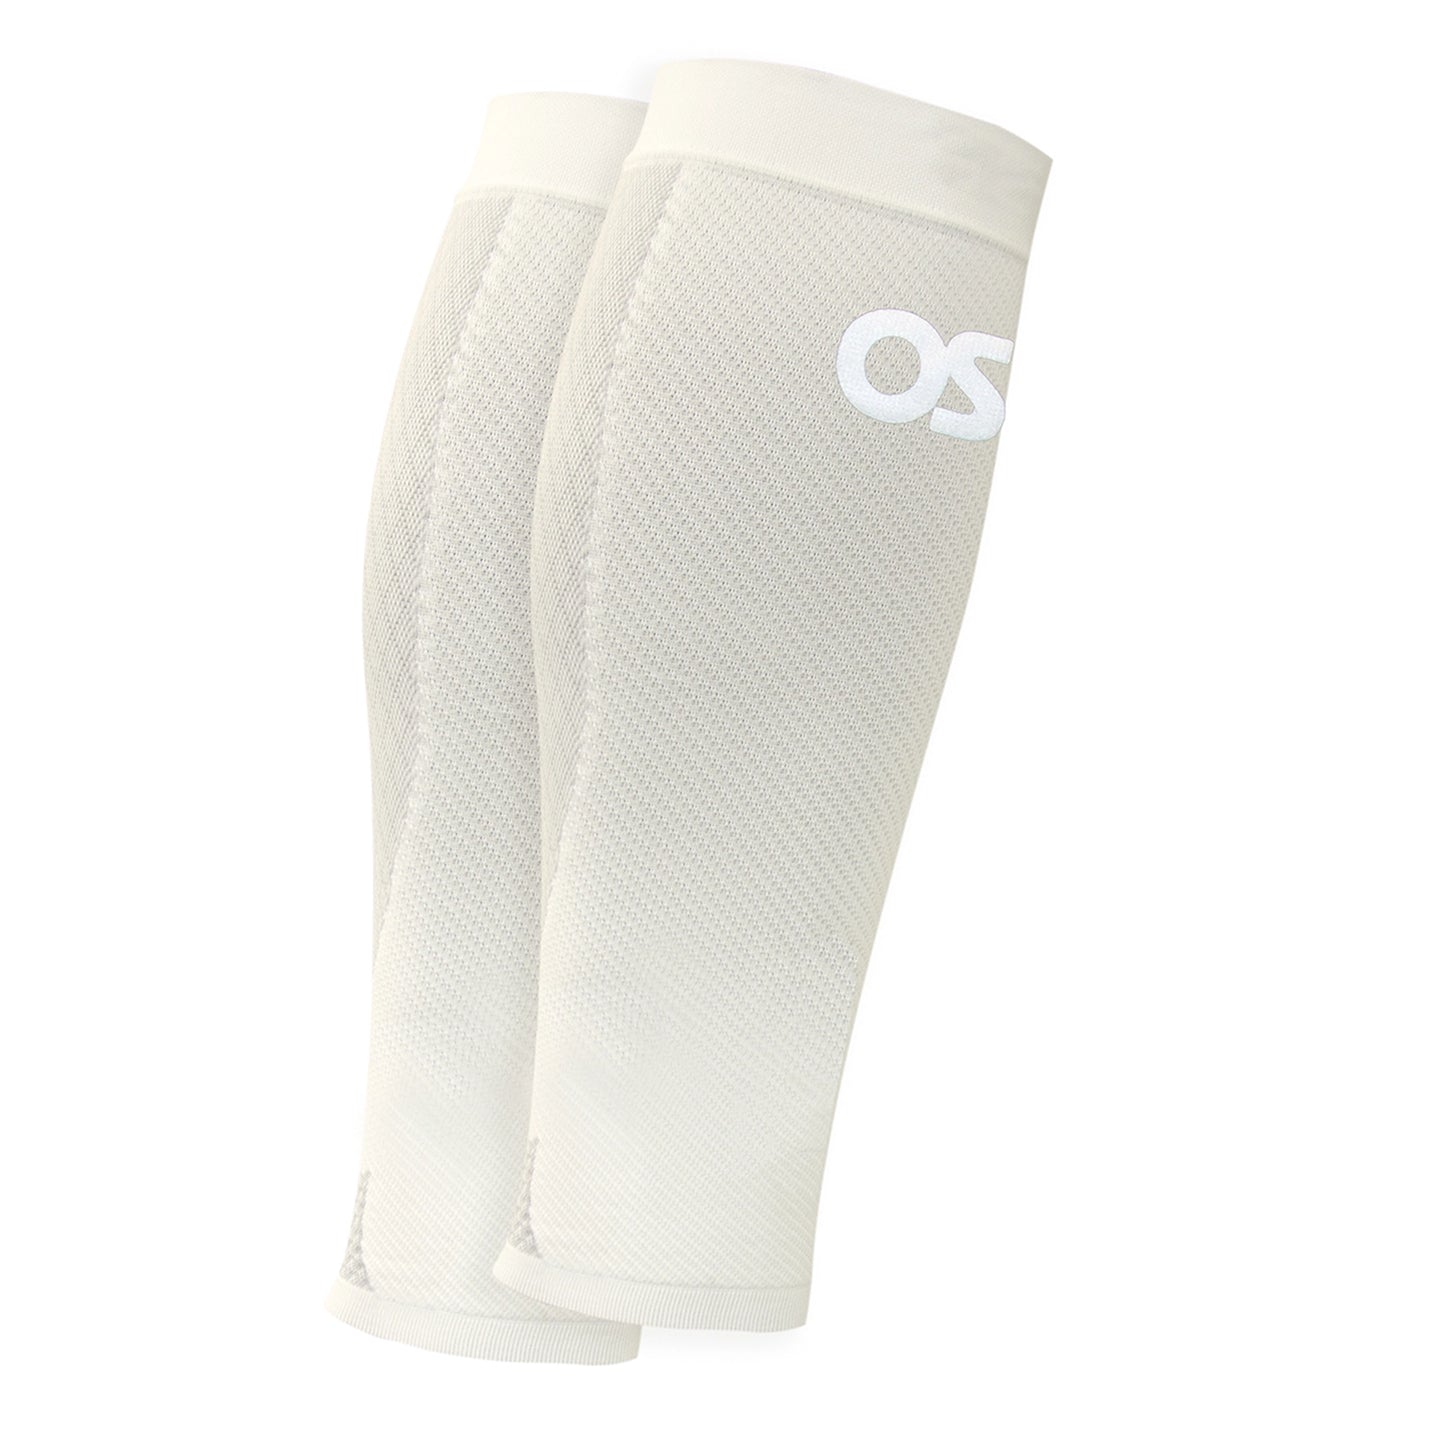 Compression Performance Calf Sleeves OX - ZEROPOINT